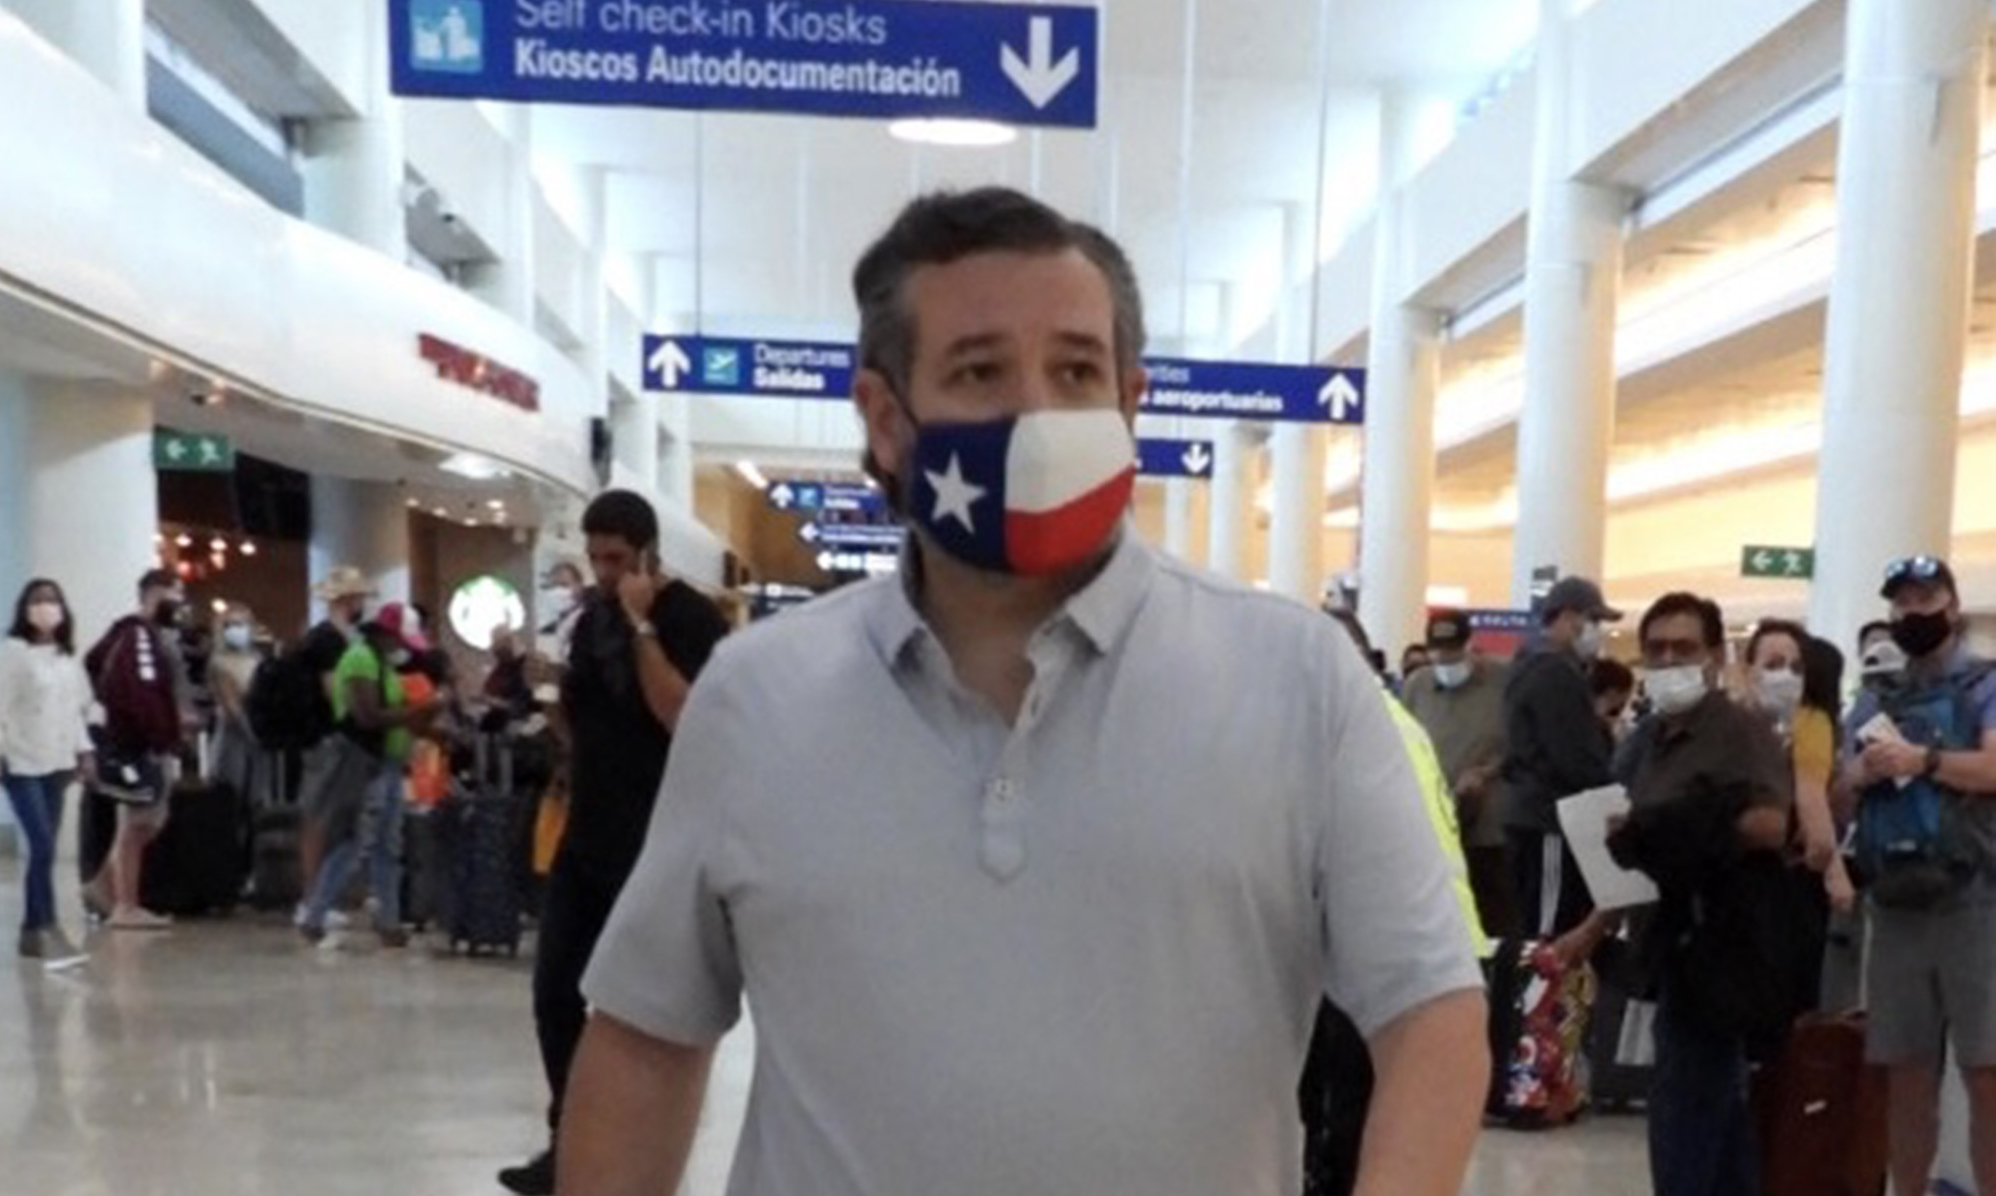 Critics accuse Ted Cruz of ‘fake compassion’ while handing out water after a trip to Mexico